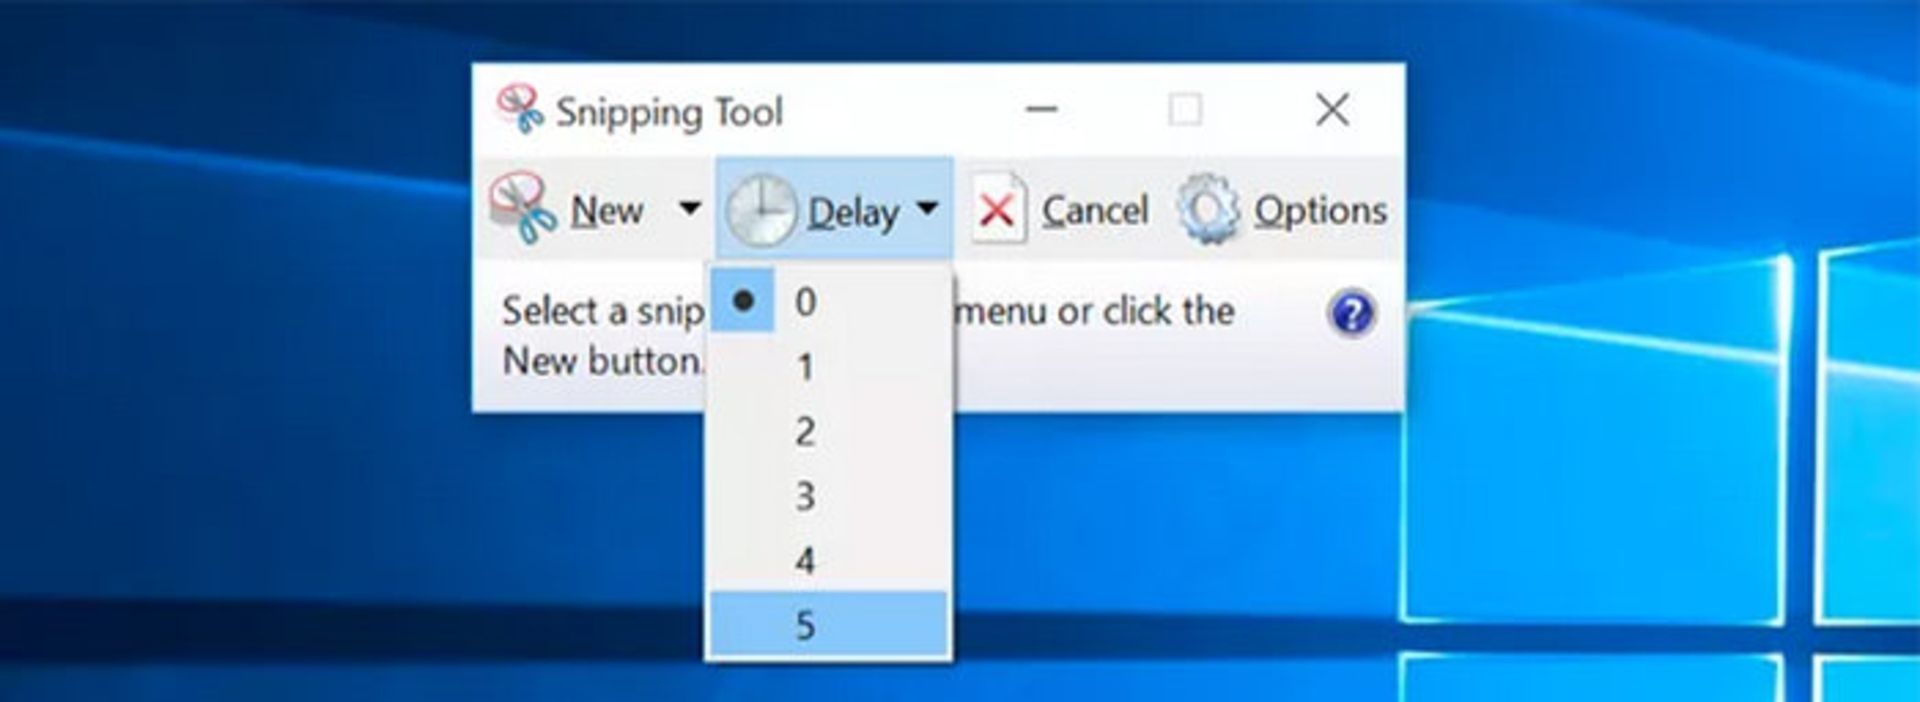 Windows 10 New Feature 4